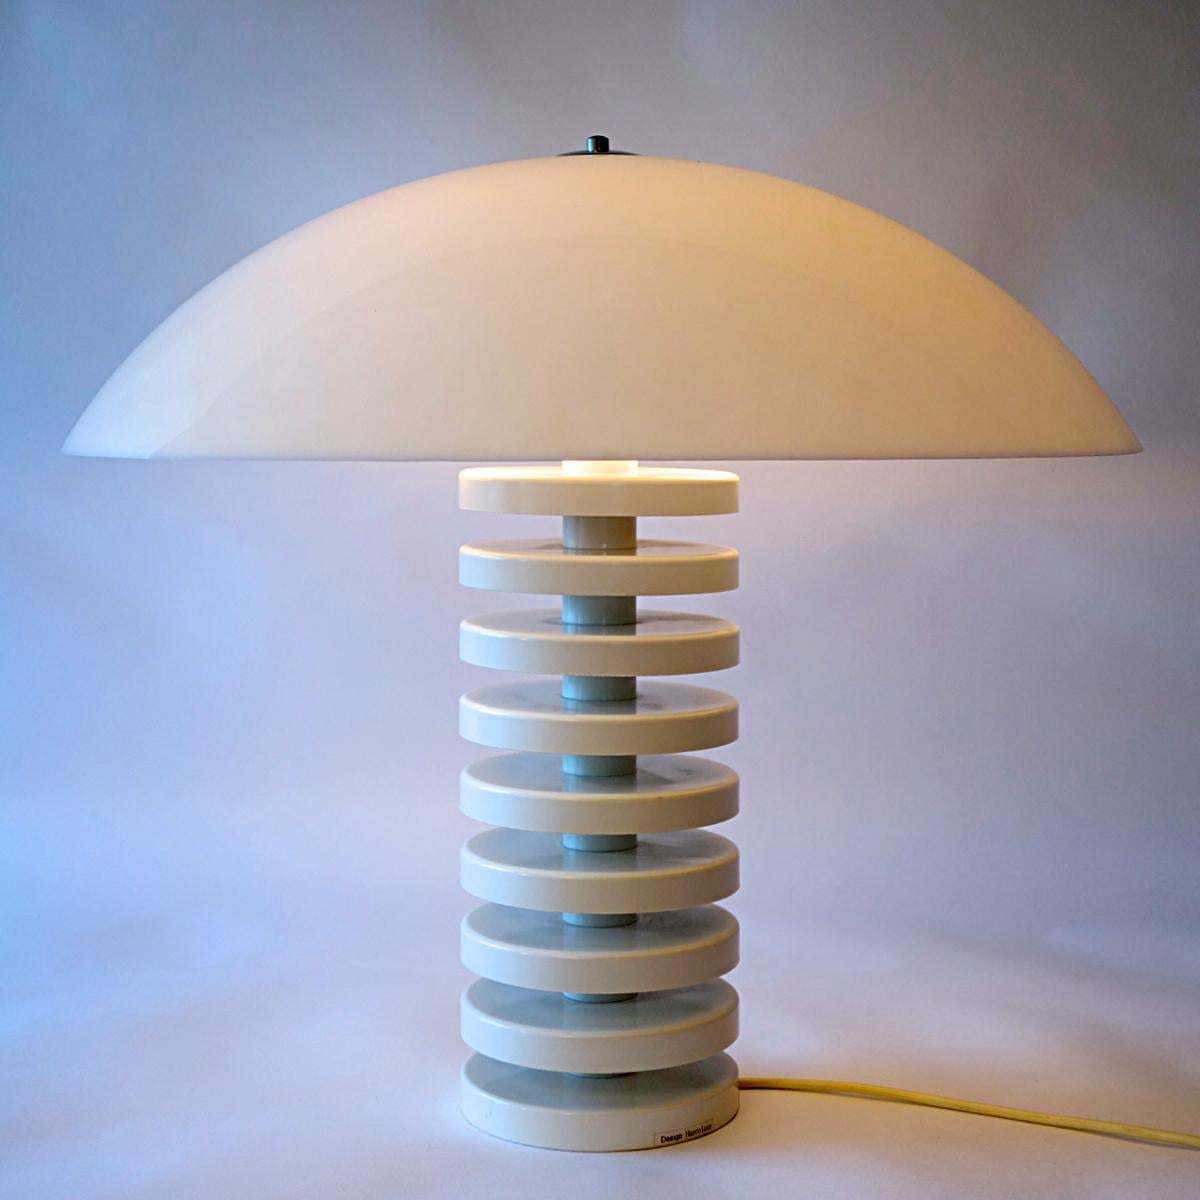 Nine white plastic disks form the base of this stylish, cheerful and very rare table lamp designed by Dutch light master Harco Loor. A large white shade tops it beautifully.
The design is both transparent and very present, making this a wonderful